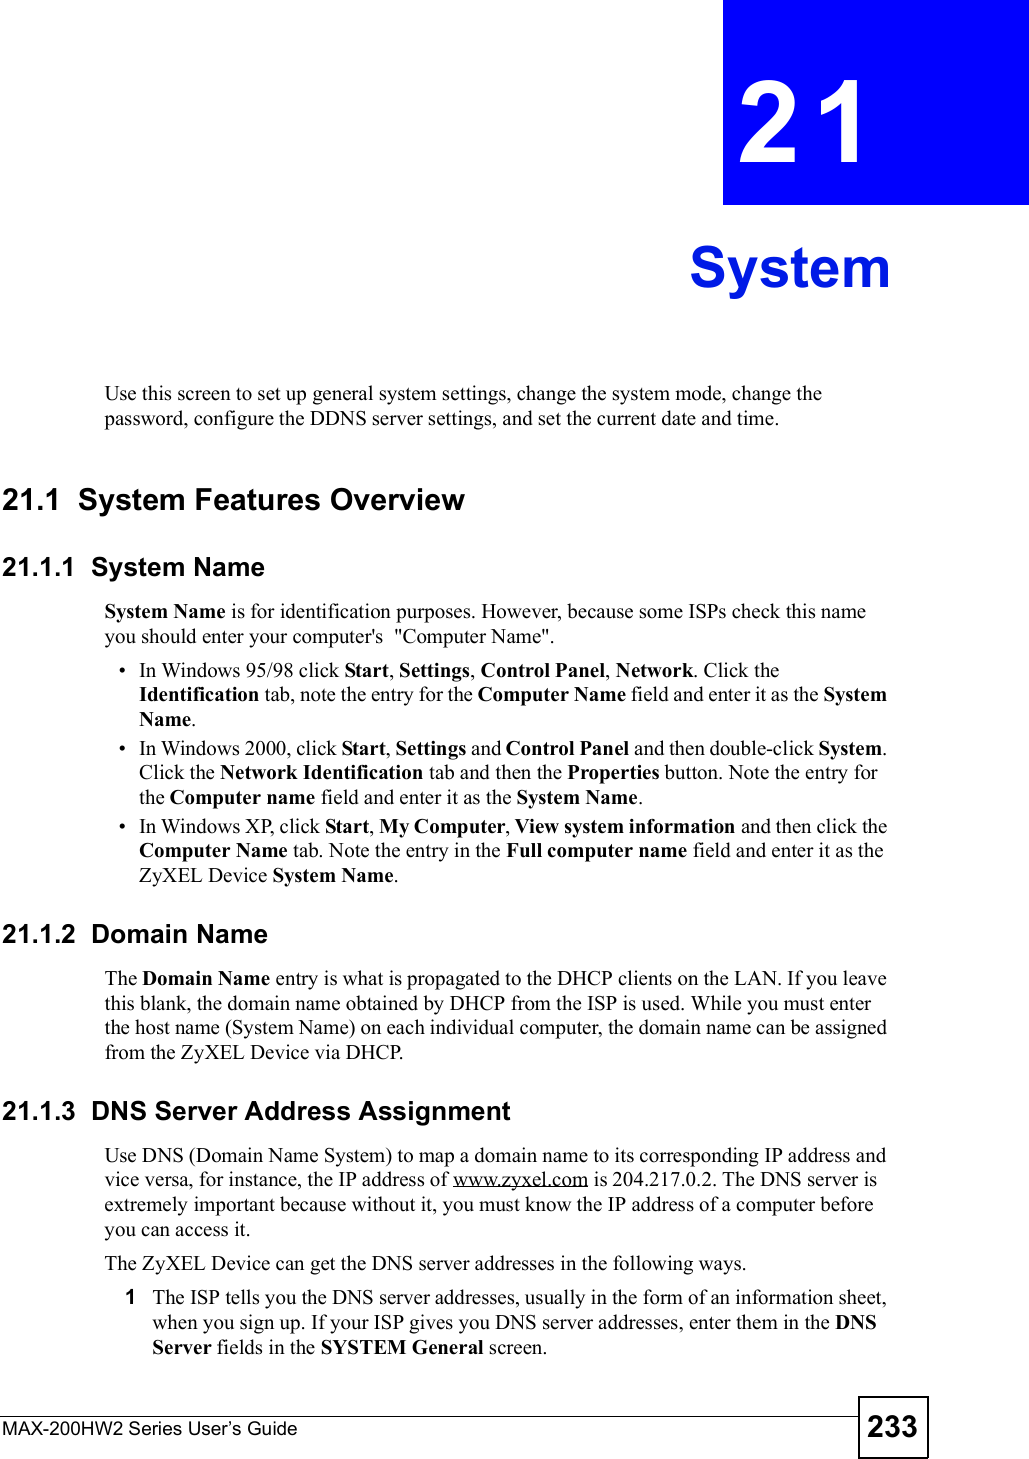 MAX-200HW2 Series User s Guide 233CHAPTER 21SystemUse this screen to set up general system settings, change the system mode, change the password, configure the DDNS server settings, and set the current date and time.21.1  System Features Overview21.1.1  System NameSystem Name is for identification purposes. However, because some ISPs check this name you should enter your computer&apos;s  &quot;Computer Name&quot;.  In Windows 95/98 click Start, Settings, Control Panel, Network. Click the Identification tab, note the entry for the Computer Name field and enter it as the SystemName. In Windows 2000, click Start, Settings and Control Panel and then double-click System.Click the Network Identification tab and then the Properties button. Note the entry for the Computer name field and enter it as the System Name. In Windows XP, click Start, My Computer, View system information and then click the Computer Name tab. Note the entry in the Full computer name field and enter it as the ZyXEL Device System Name.21.1.2  Domain NameThe Domain Name entry is what is propagated to the DHCP clients on the LAN. If you leave this blank, the domain name obtained by DHCP from the ISP is used. While you must enter the host name (System Name) on each individual computer, the domain name can be assigned from the ZyXEL Device via DHCP.21.1.3  DNS Server Address AssignmentUse DNS (Domain Name System) to map a domain name to its corresponding IP address and vice versa, for instance, the IP address of www.zyxel.com is 204.217.0.2. The DNS server is extremely important because without it, you must know the IP address of a computer before you can access it. The ZyXEL Device can get the DNS server addresses in the following ways.1The ISP tells you the DNS server addresses, usually in the form of an information sheet, when you sign up. If your ISP gives you DNS server addresses, enter them in the DNSServer fields in the SYSTEM General screen.